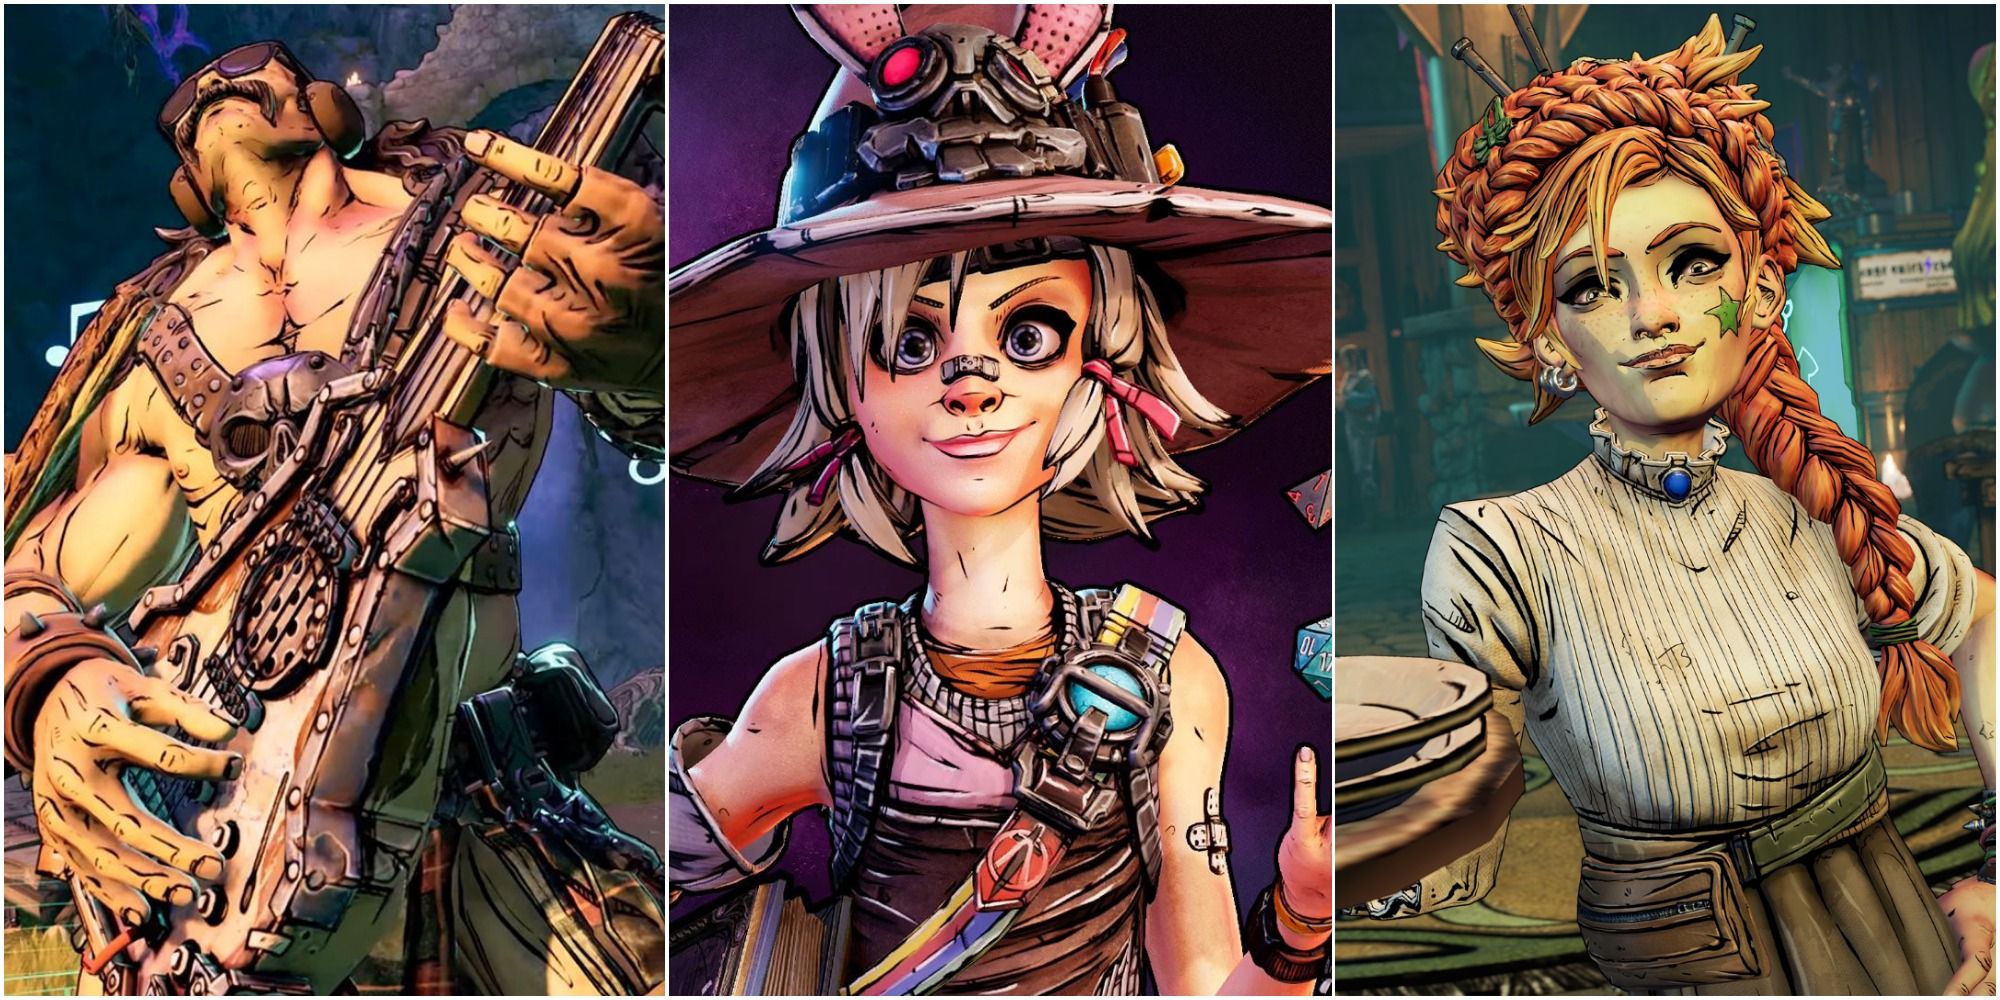 A split image from left to right: Torgue playing his lute, Tiny Tina throwing dice into the air, Izzy holding a tray of non-alcoholic soda